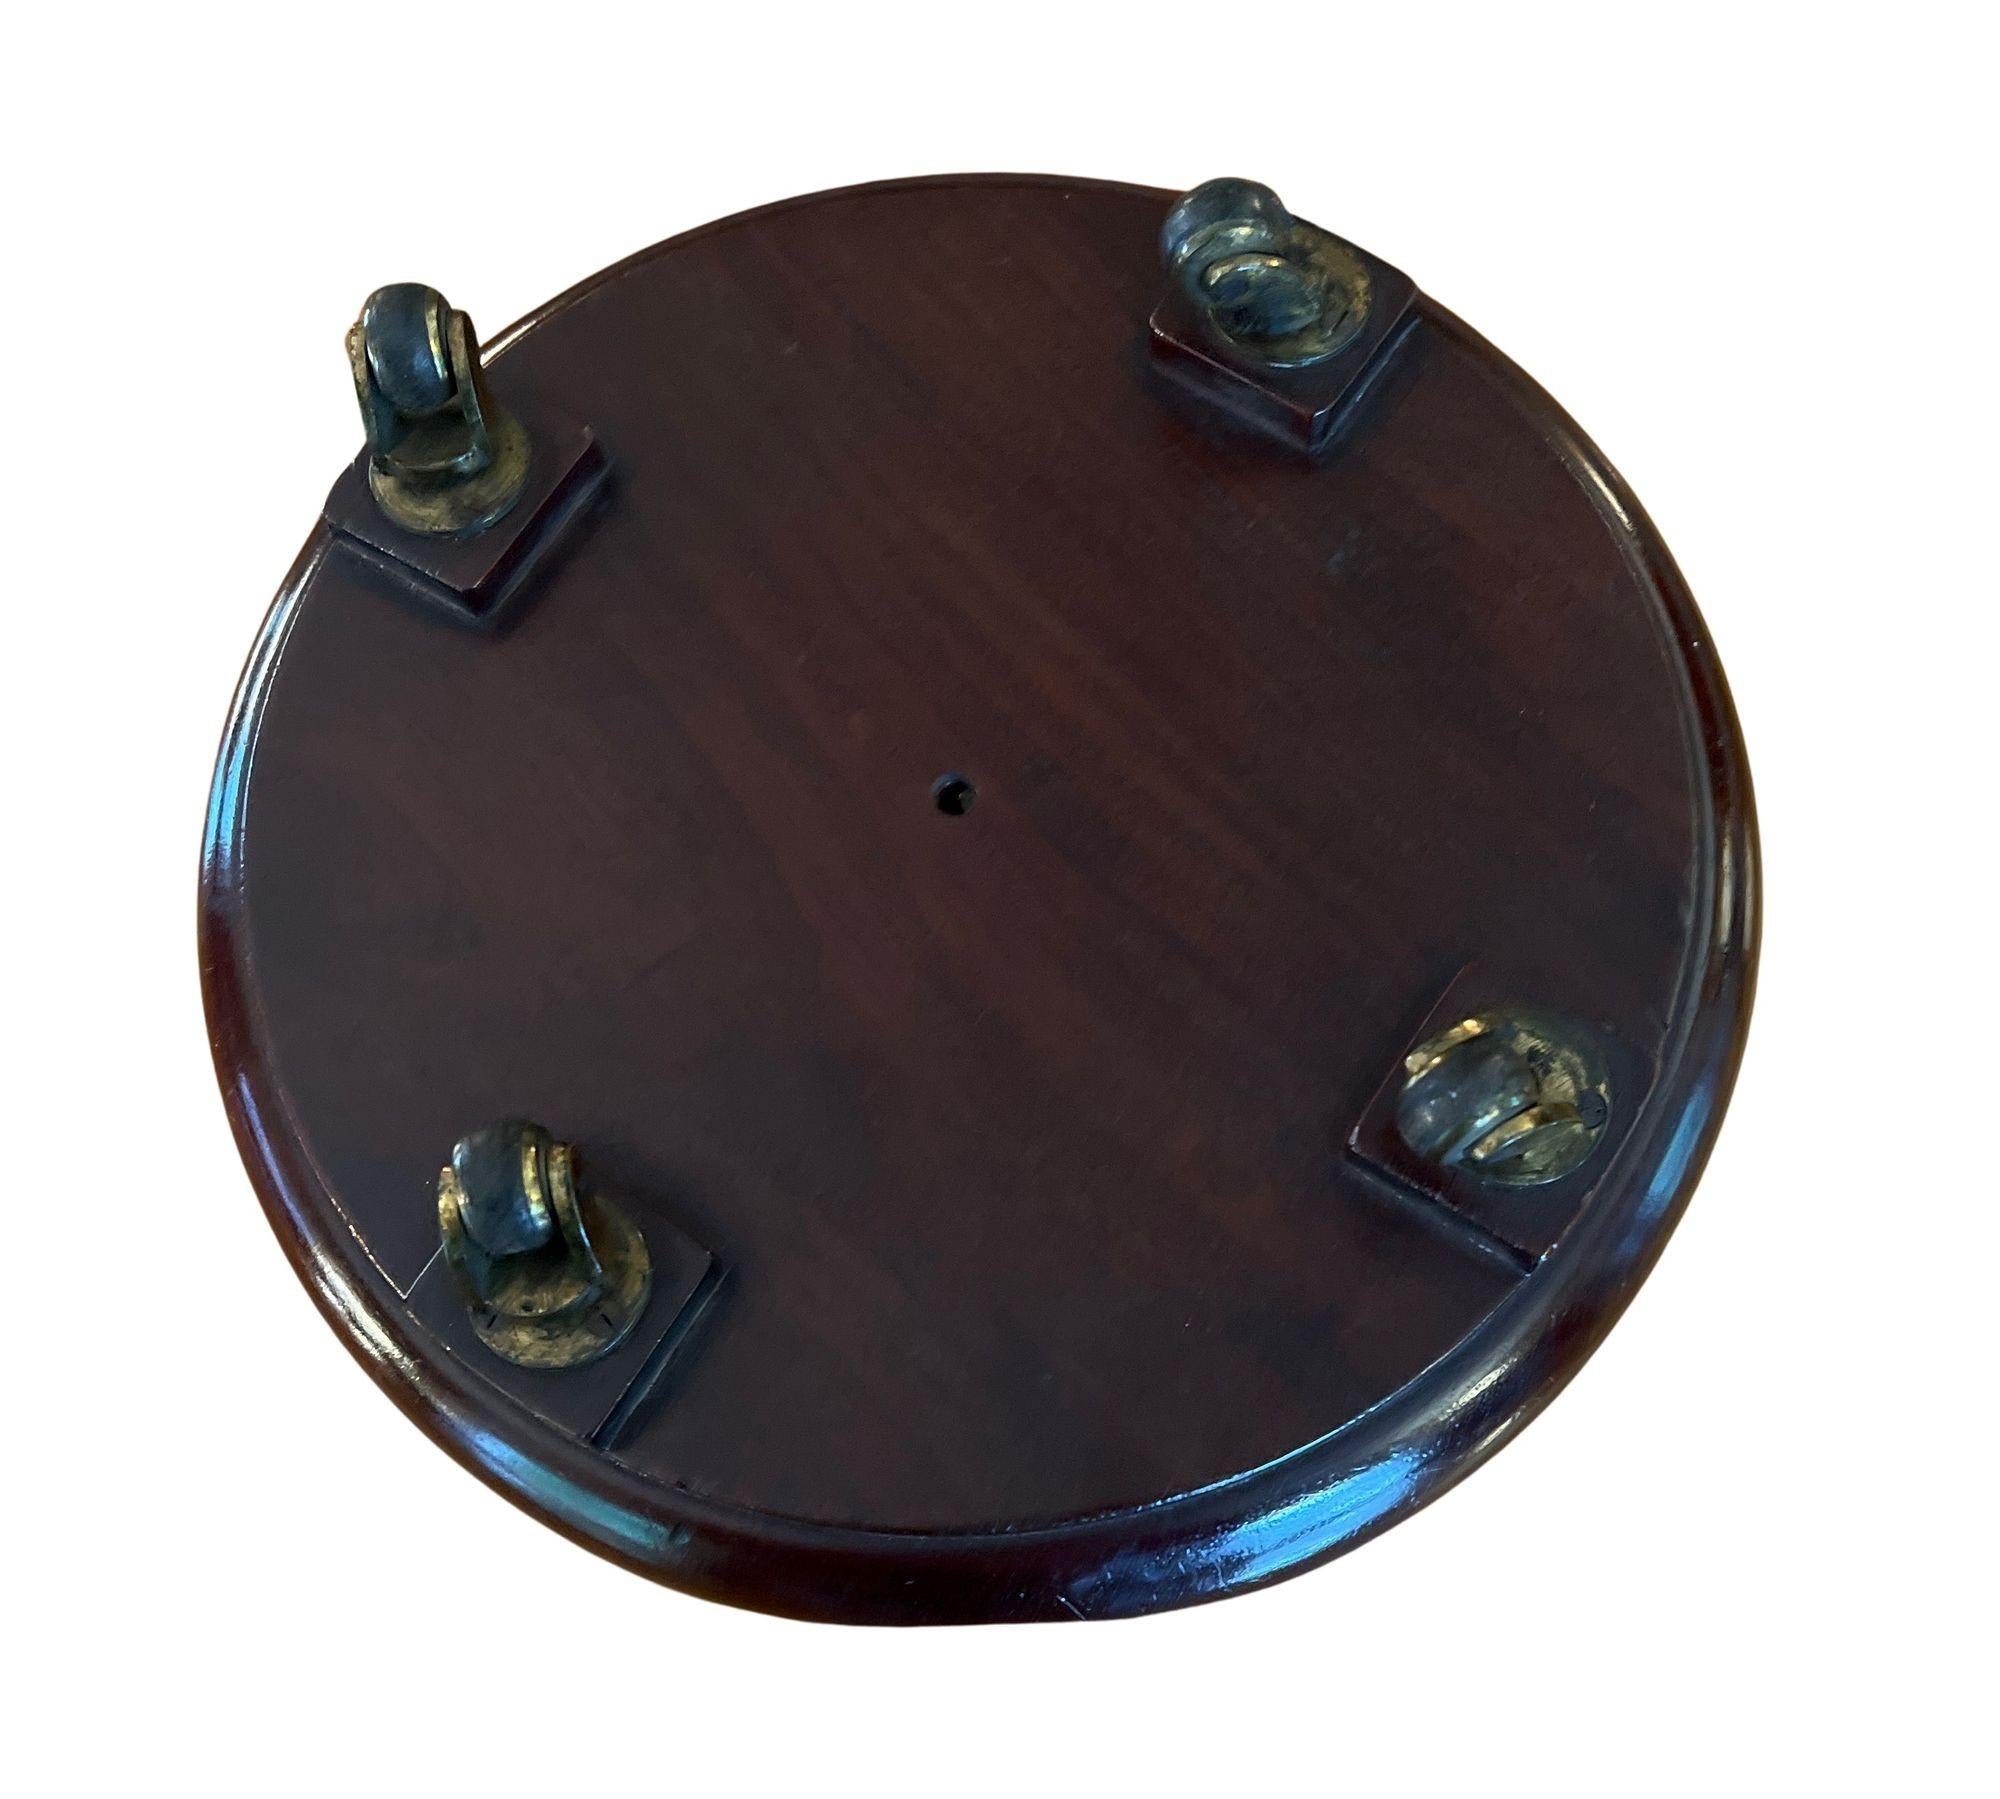 The round coaster with reeder lip border on 4 brass casters